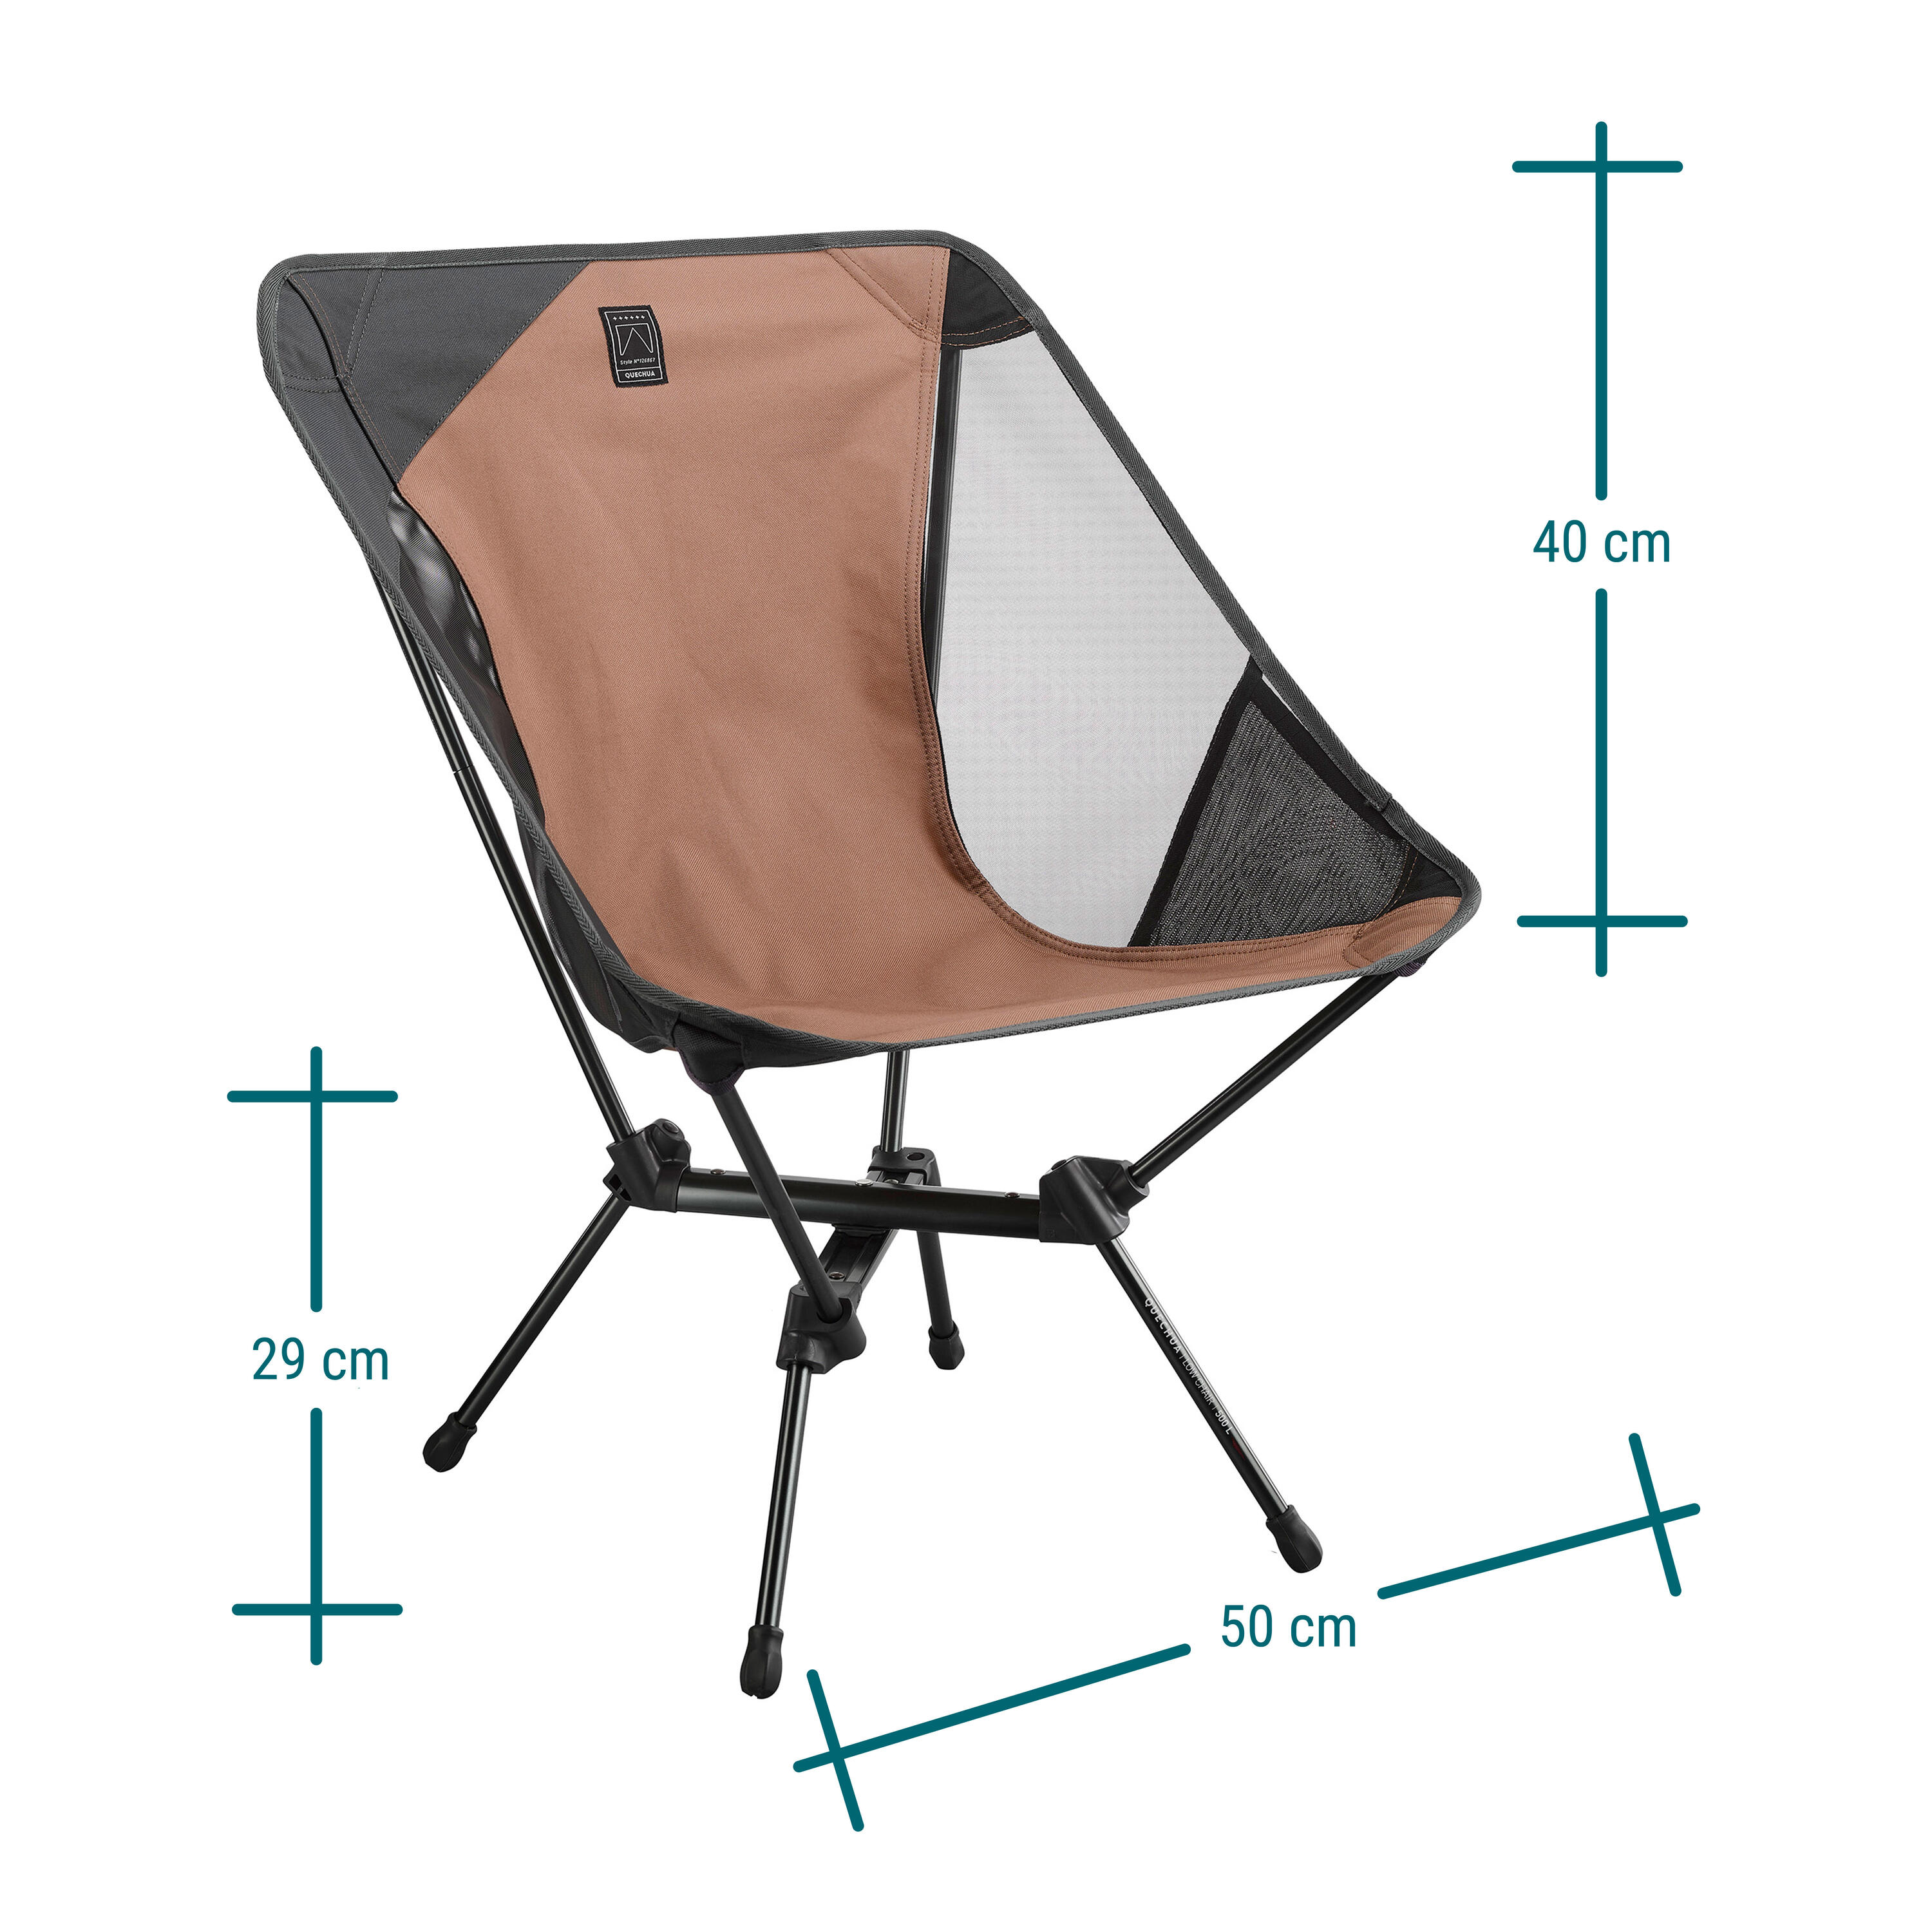 LOW FOLDING CAMPING CHAIR MH500 - BROWN 4/10